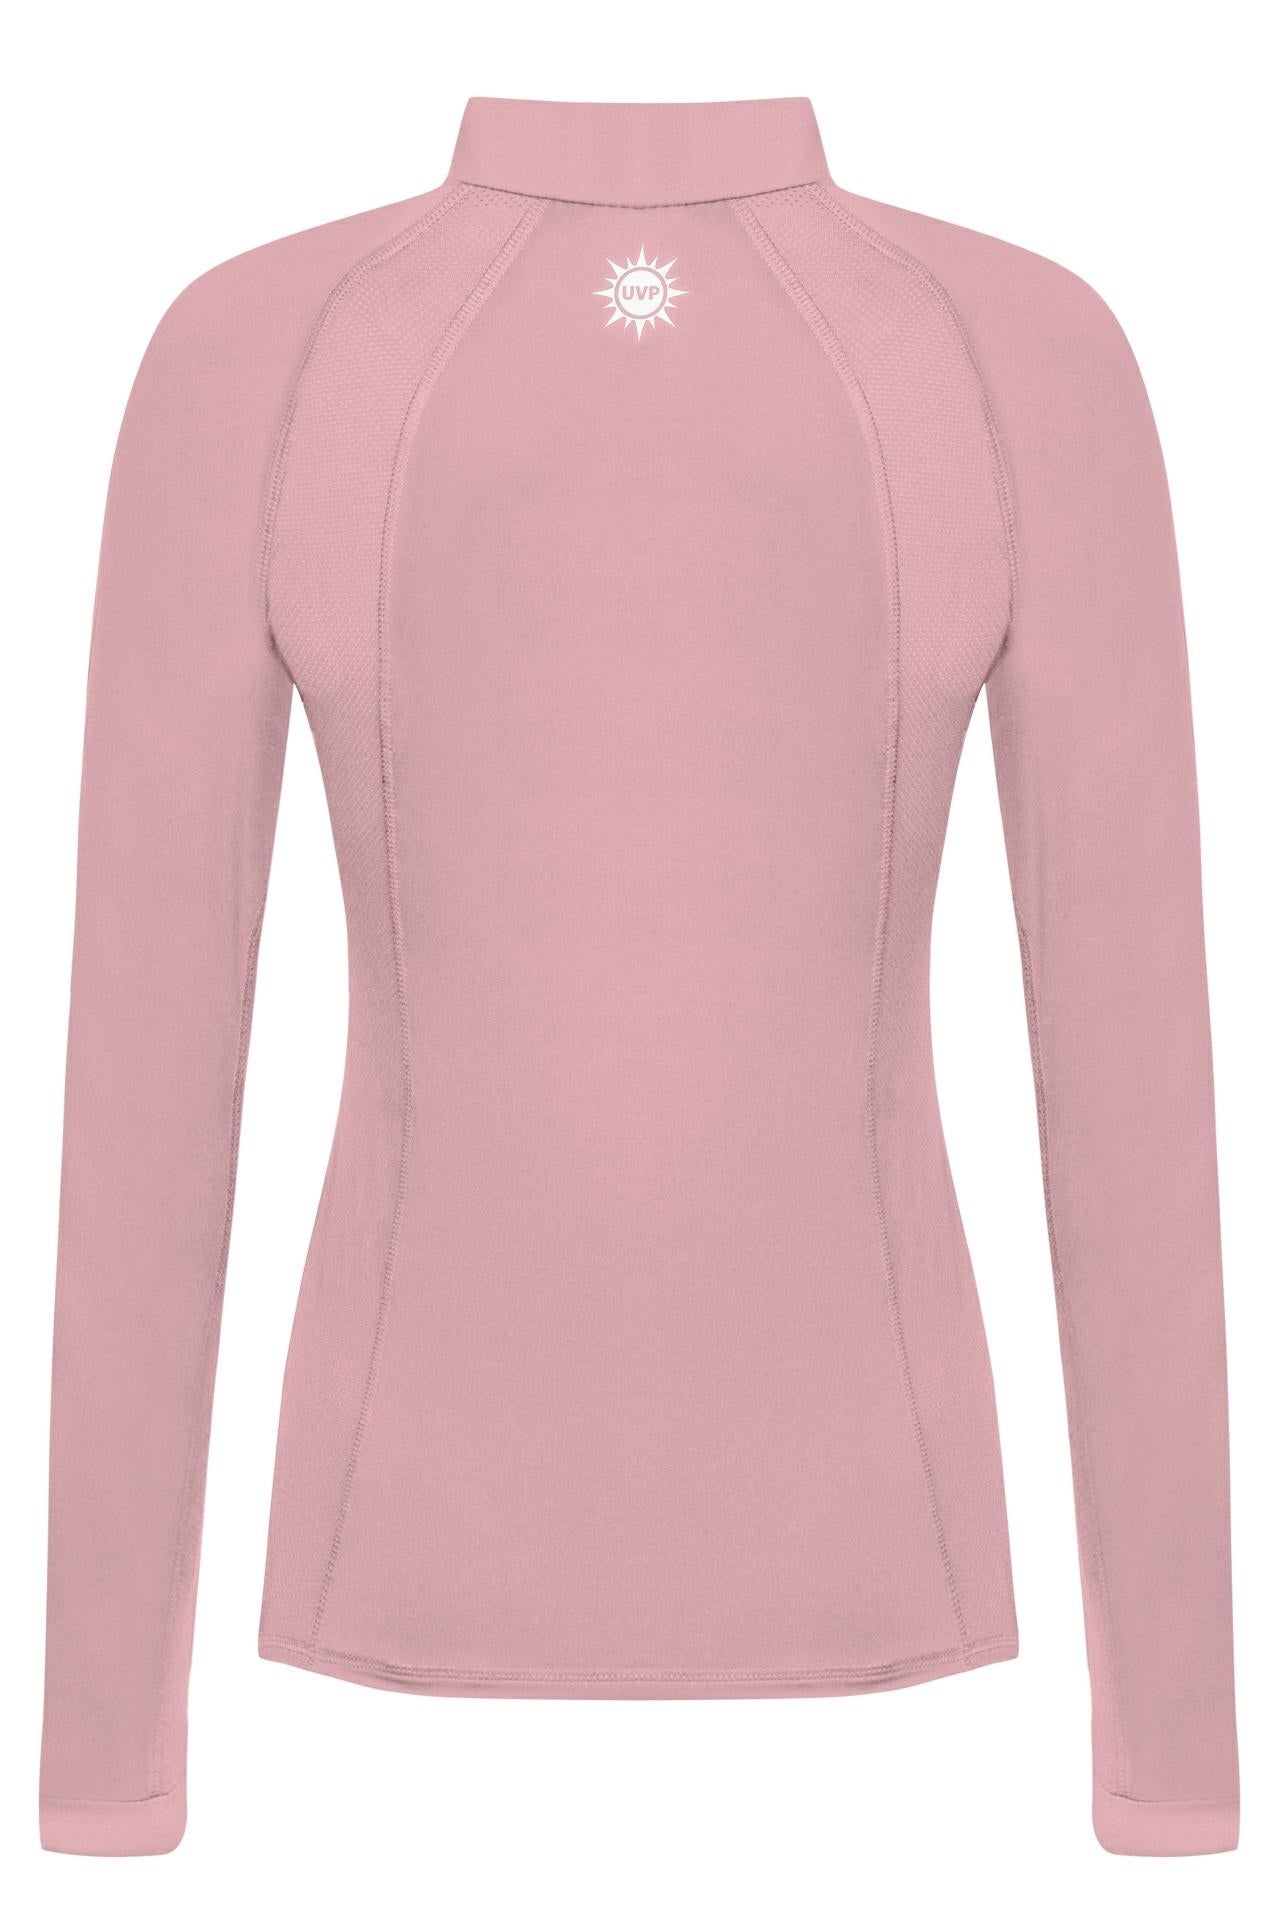 Ladies Equestrian Base Layer Tops